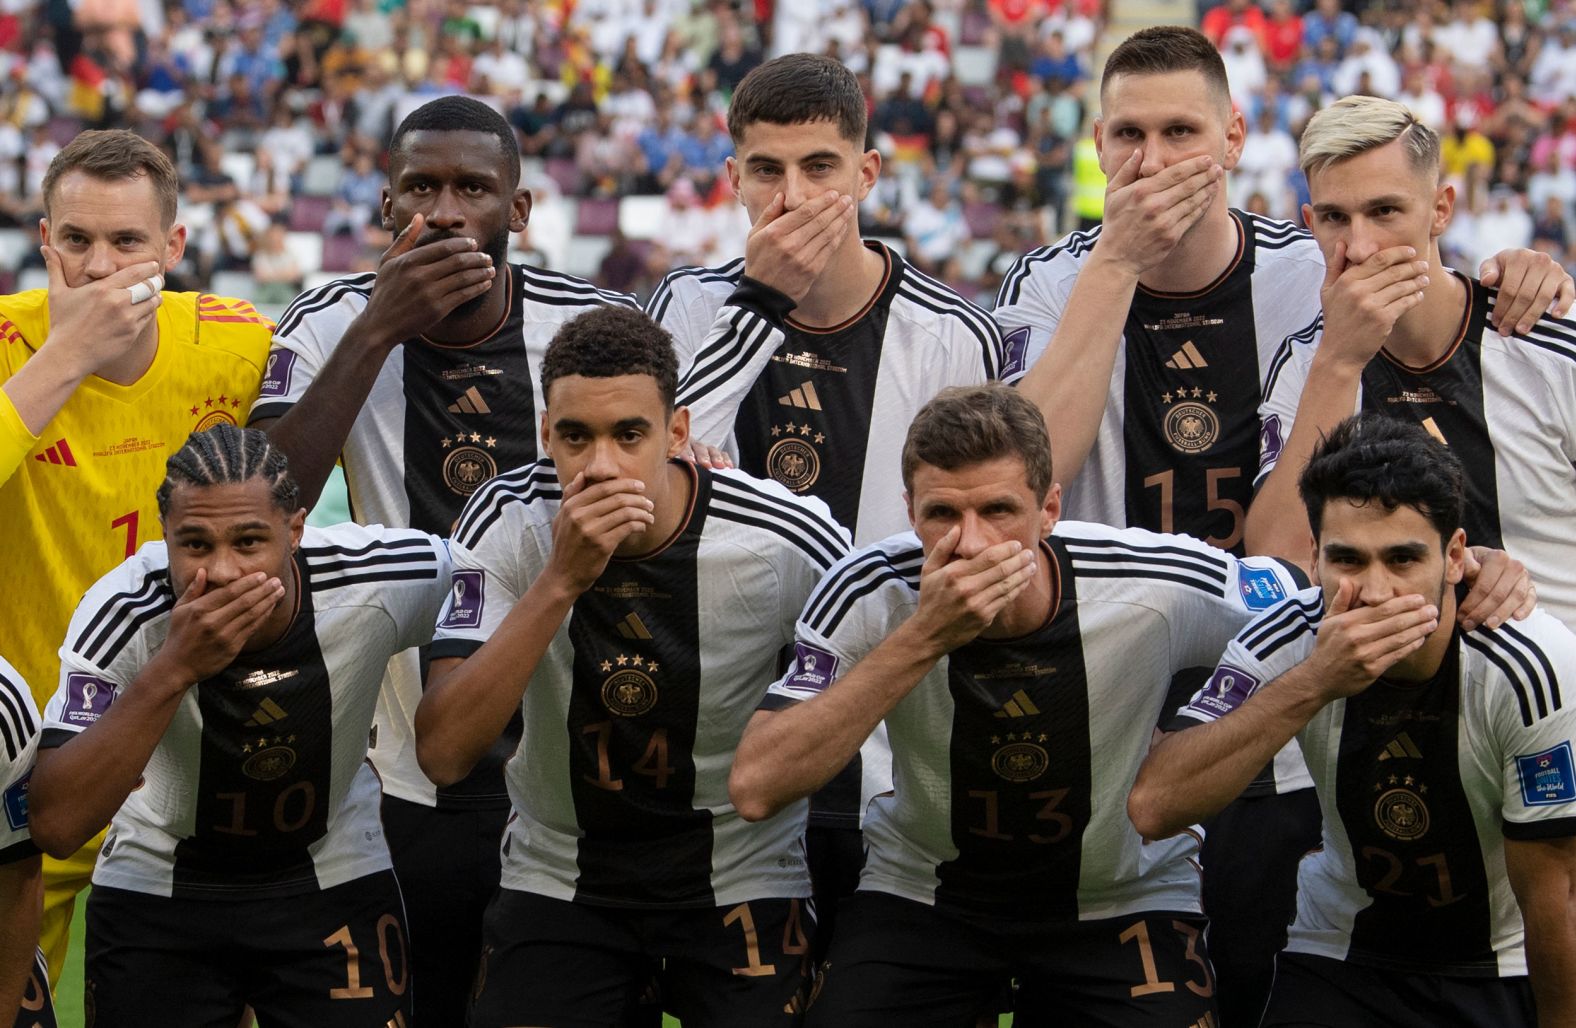 Before kickoff against Japan, Germany's starting 11 posed for their team photo with their right hands in front of their mouths. The team's social media feed confirmed that <a href="index.php?page=&url=https%3A%2F%2Fwww.cnn.com%2Fsport%2Flive-news%2Fworld-cup-11-23-22%2Fh_d06430578d0638bd3e9c4c995ea621d0" target="_blank">the gesture was designed to protest</a> FIFA's decision to ban the "OneLove" anti-discrimination armband that many European captains had been hoping to wear in Qatar.